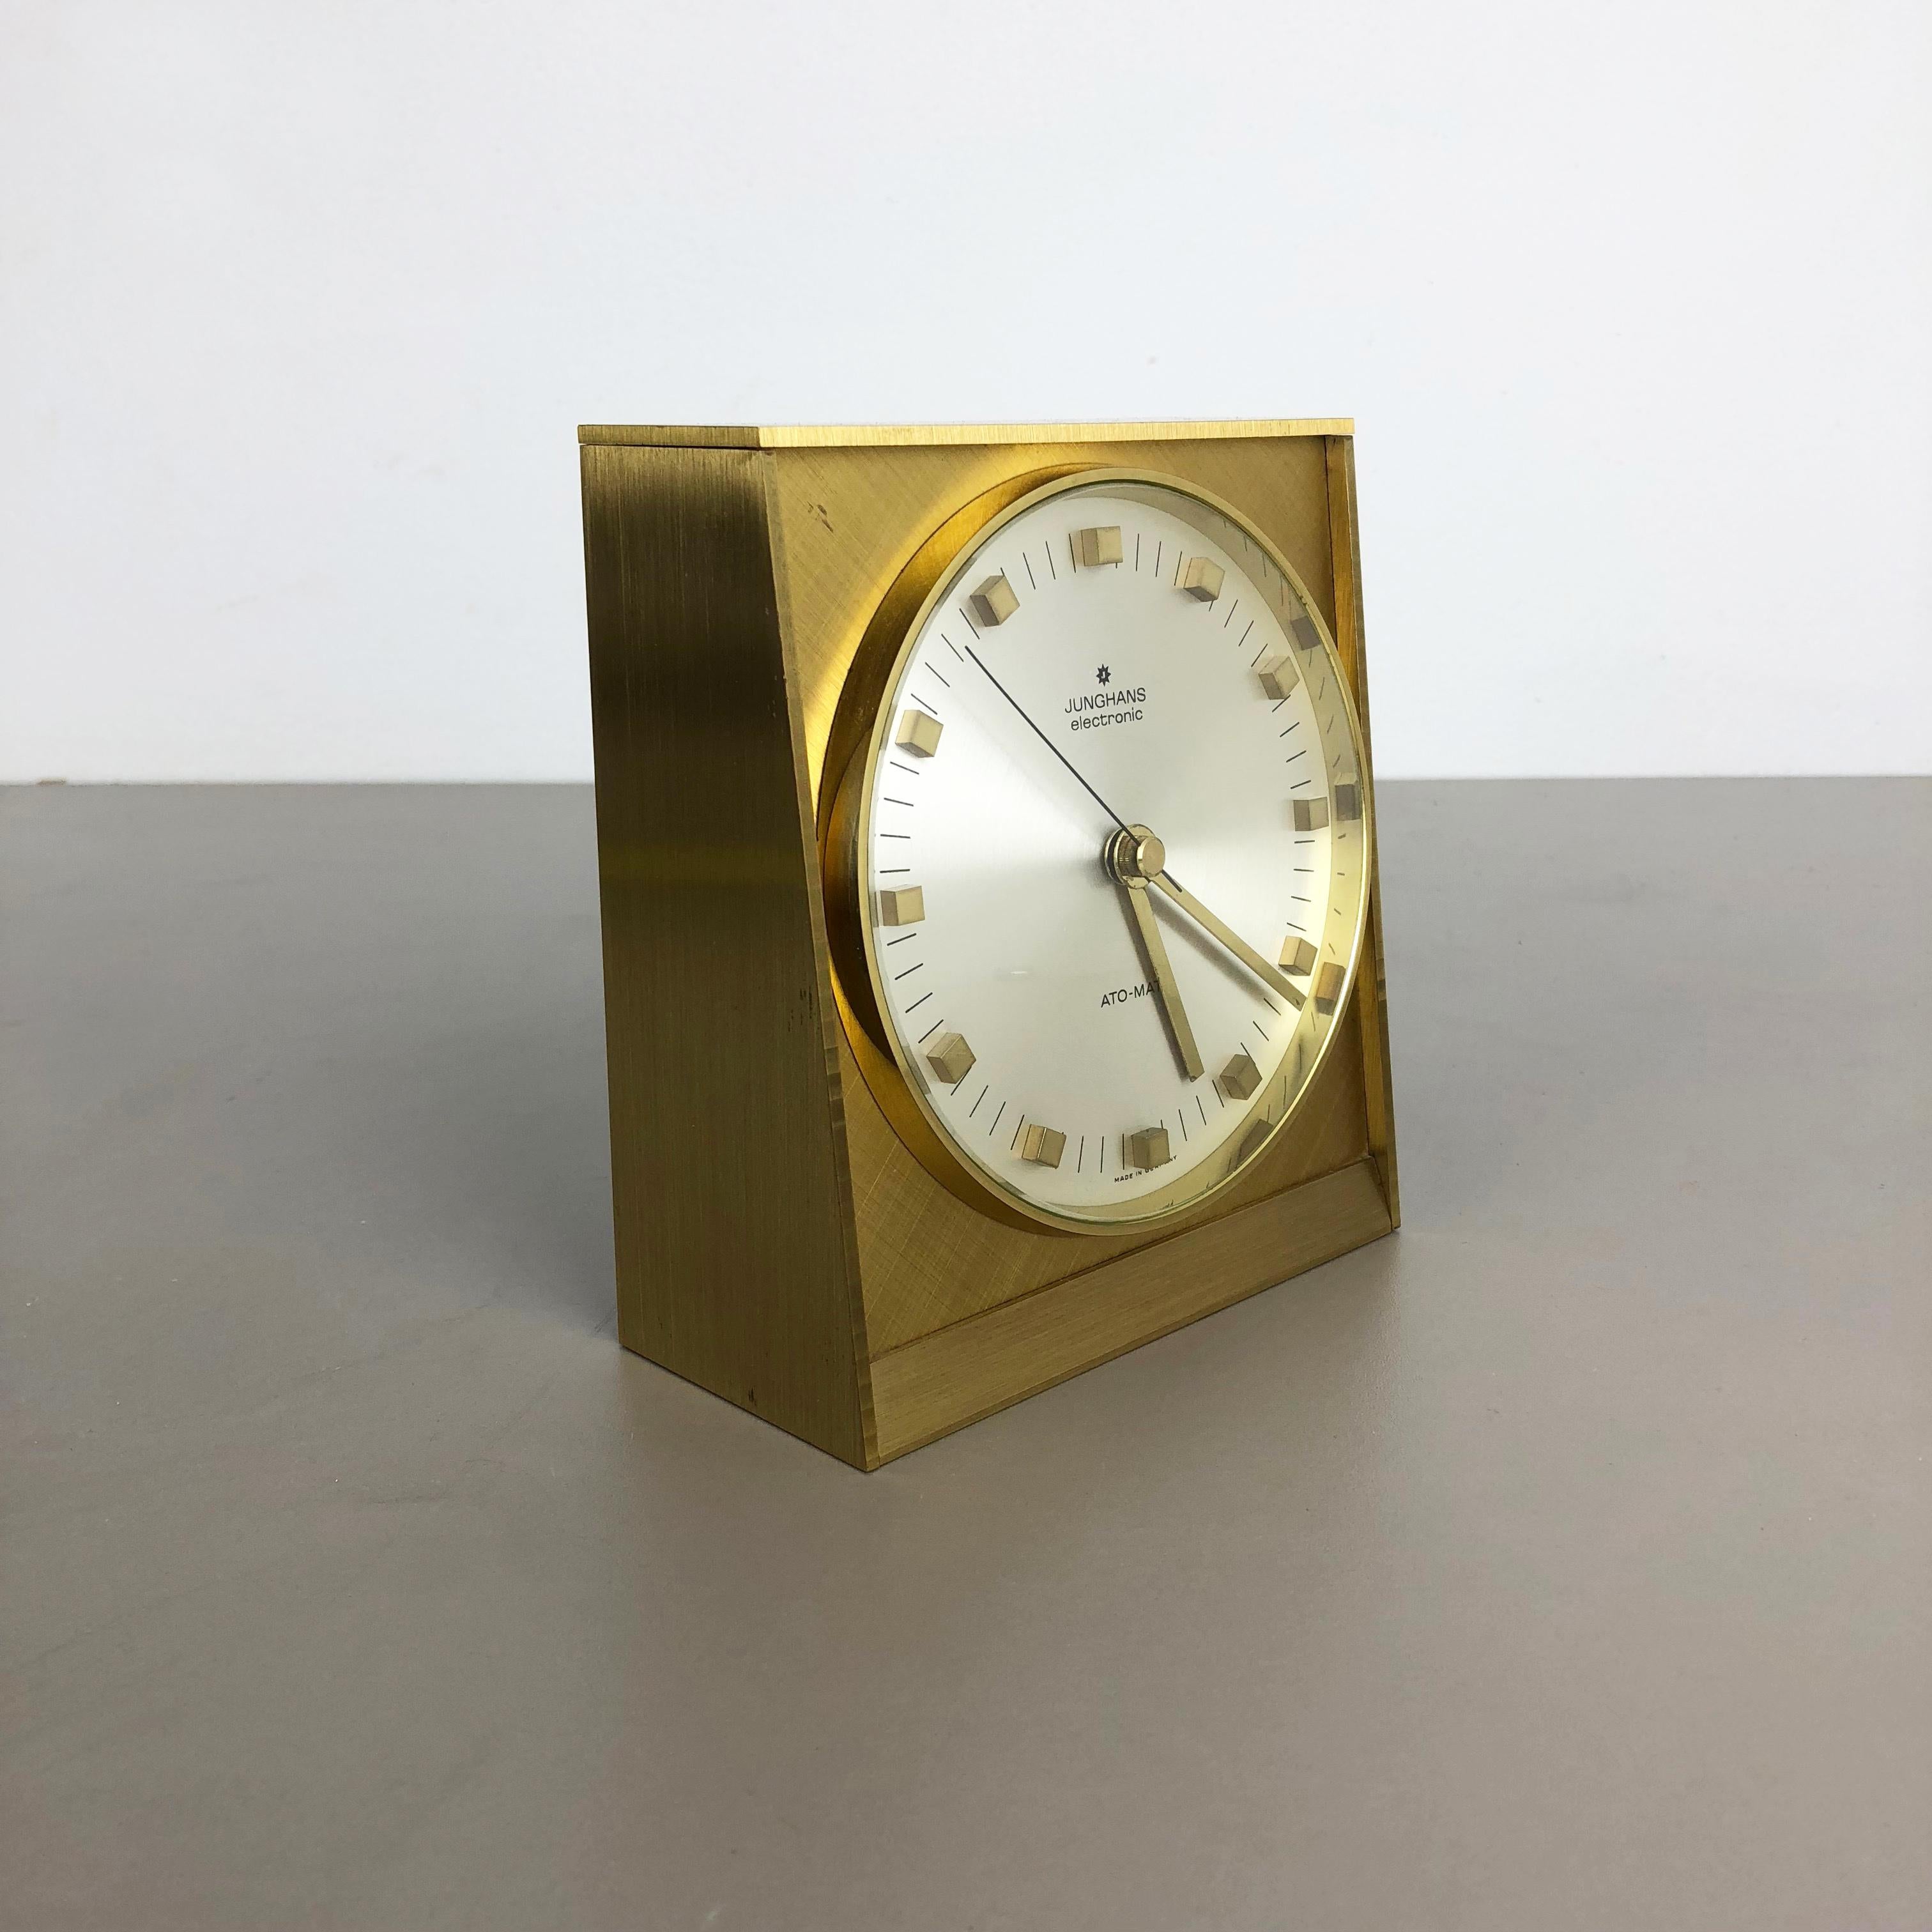 Article:

Table clock



Origin:

Germany


Producer:

Junghans Electronic, Germany


Age:

1960s



Description:

This original vintage table clock was produced in the 1960s by the premium clock producer Junghans in Germany.